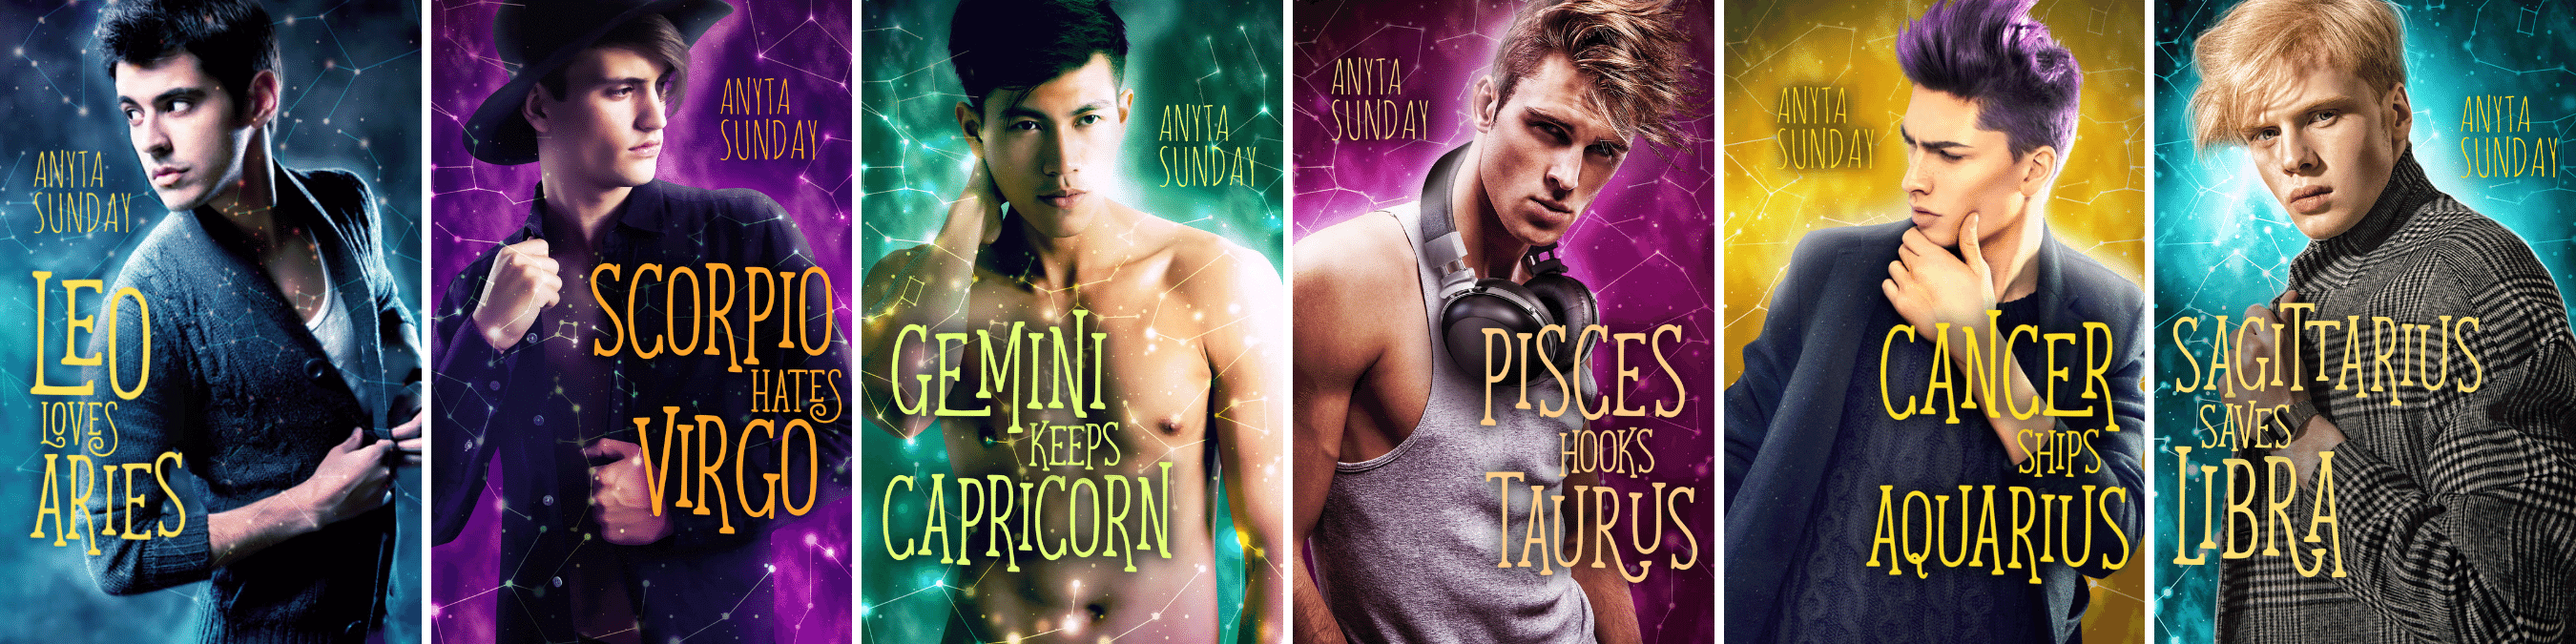 Signs of Love book covers